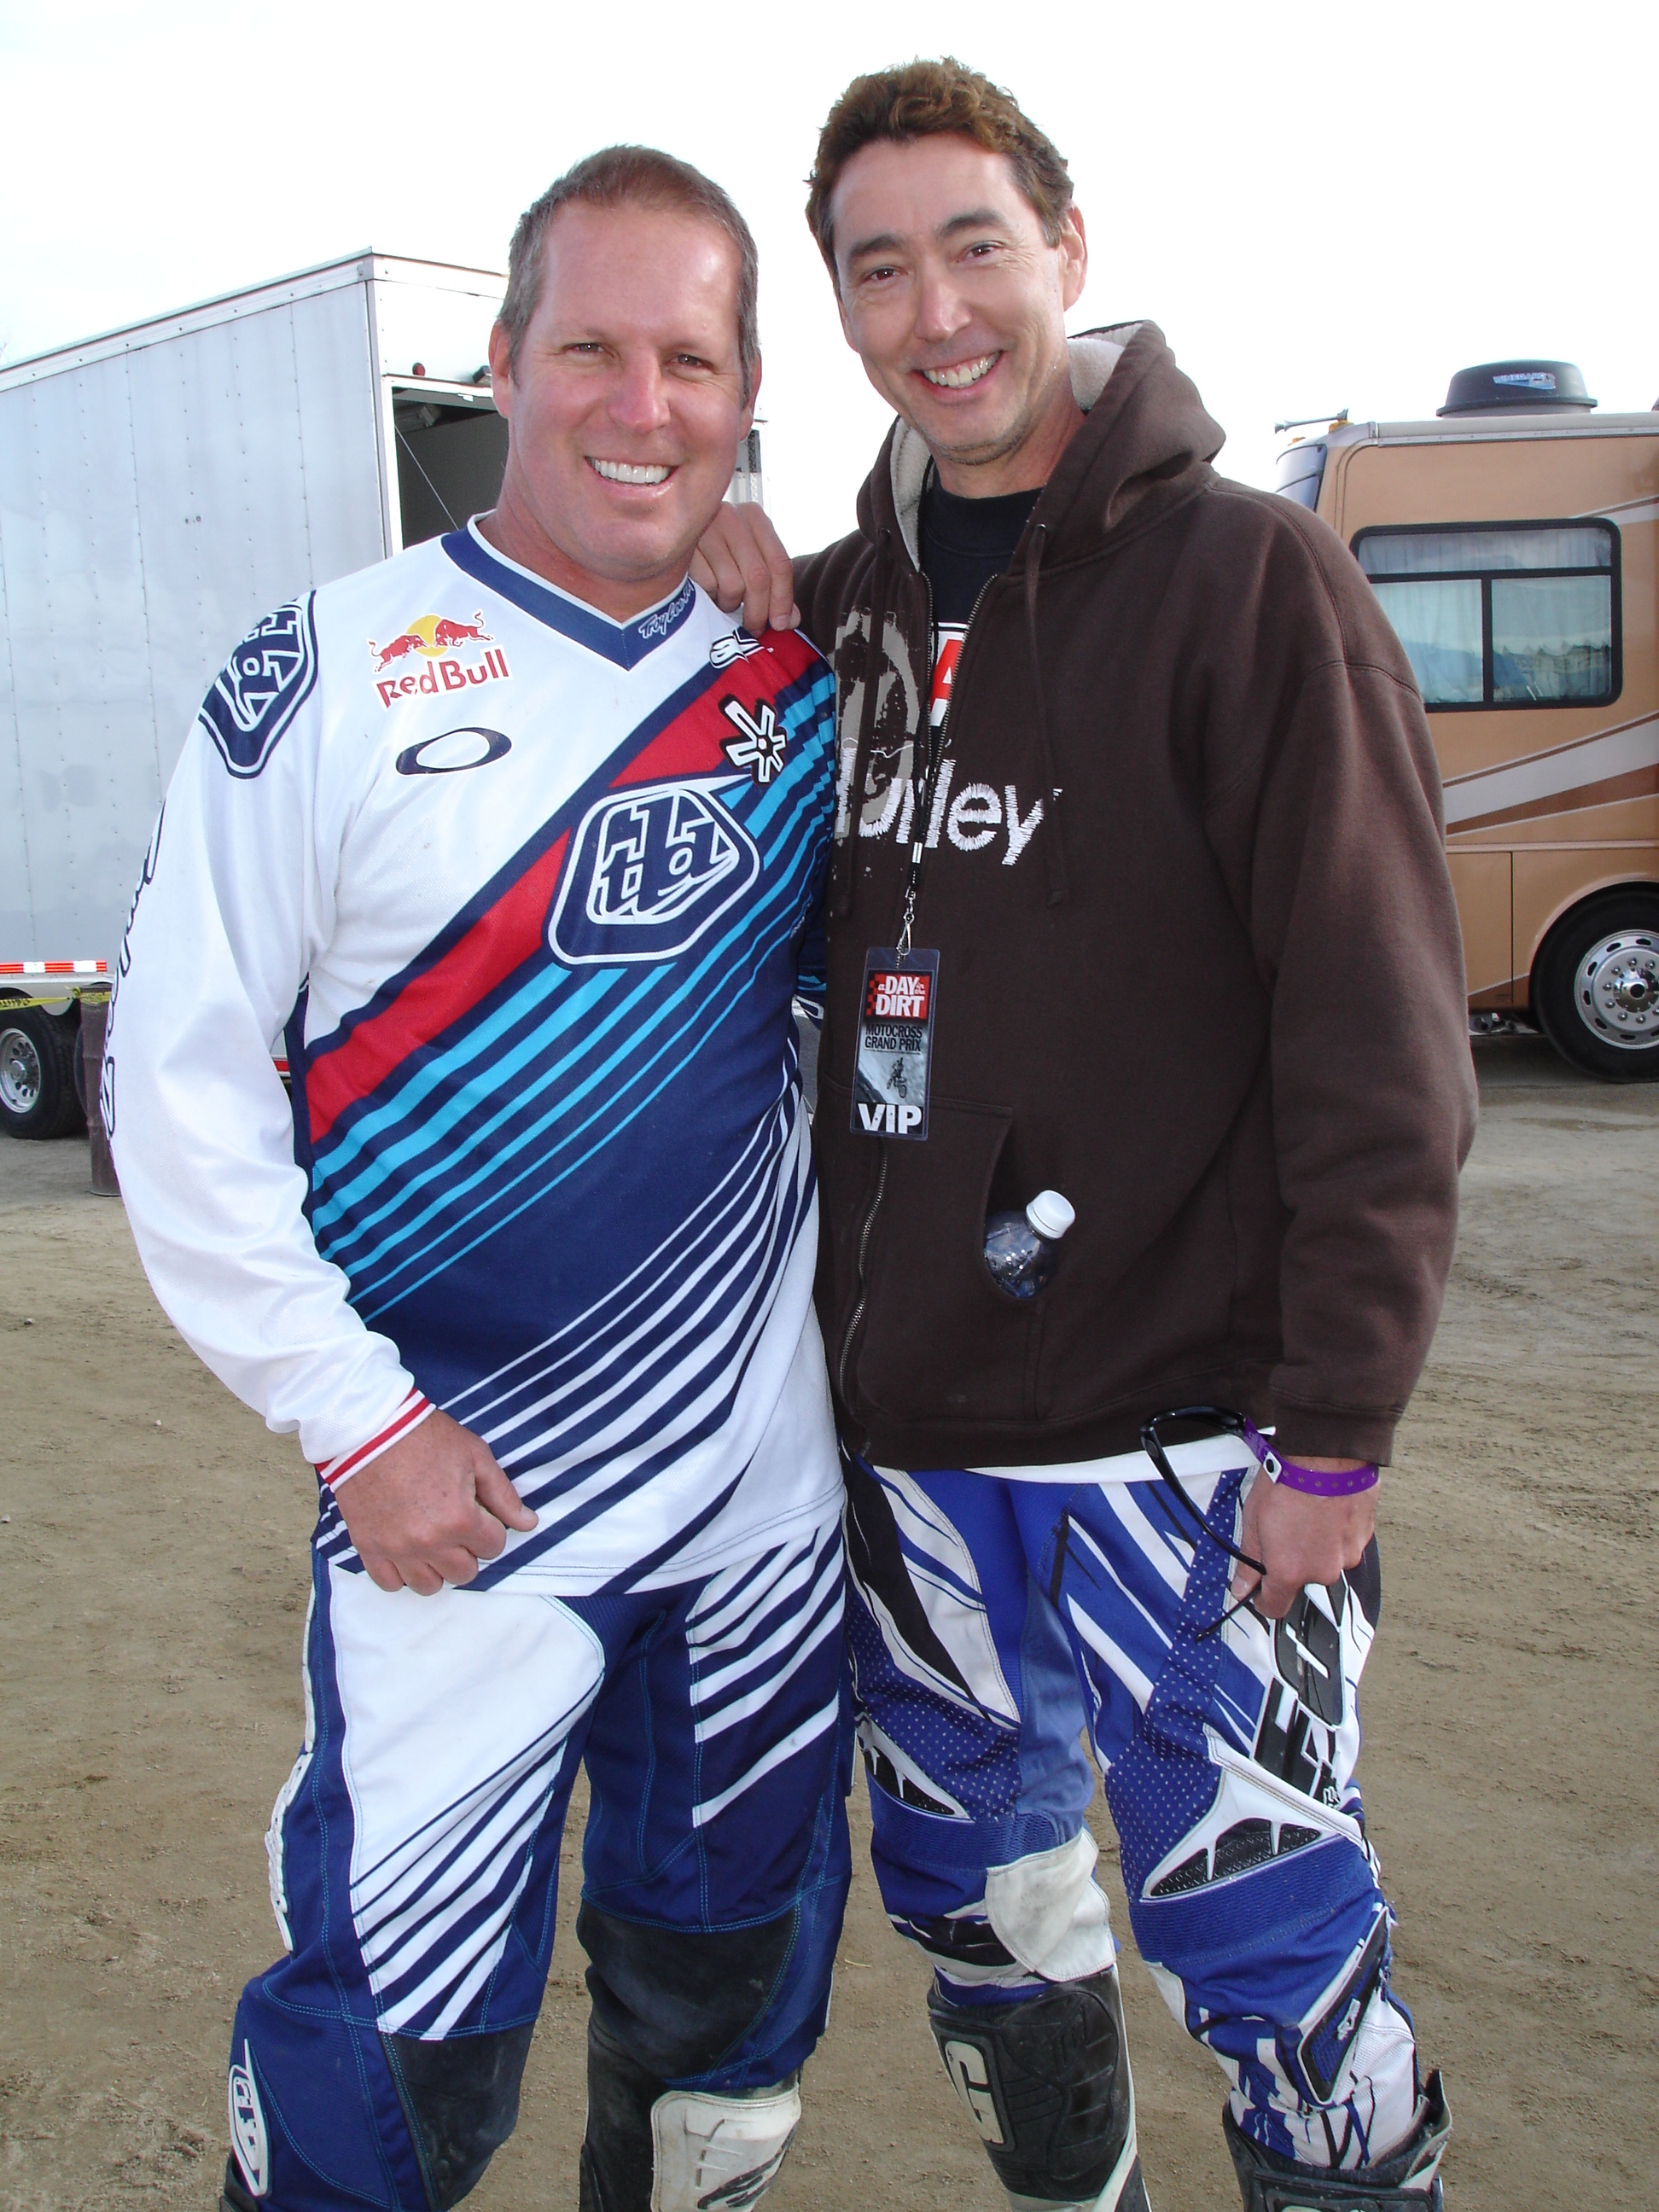 With me Is my partner in crime AMA Supercross,Motocross Multi-Champion, and the 2012 AMSOIL Cup Champion Ricky Johnson